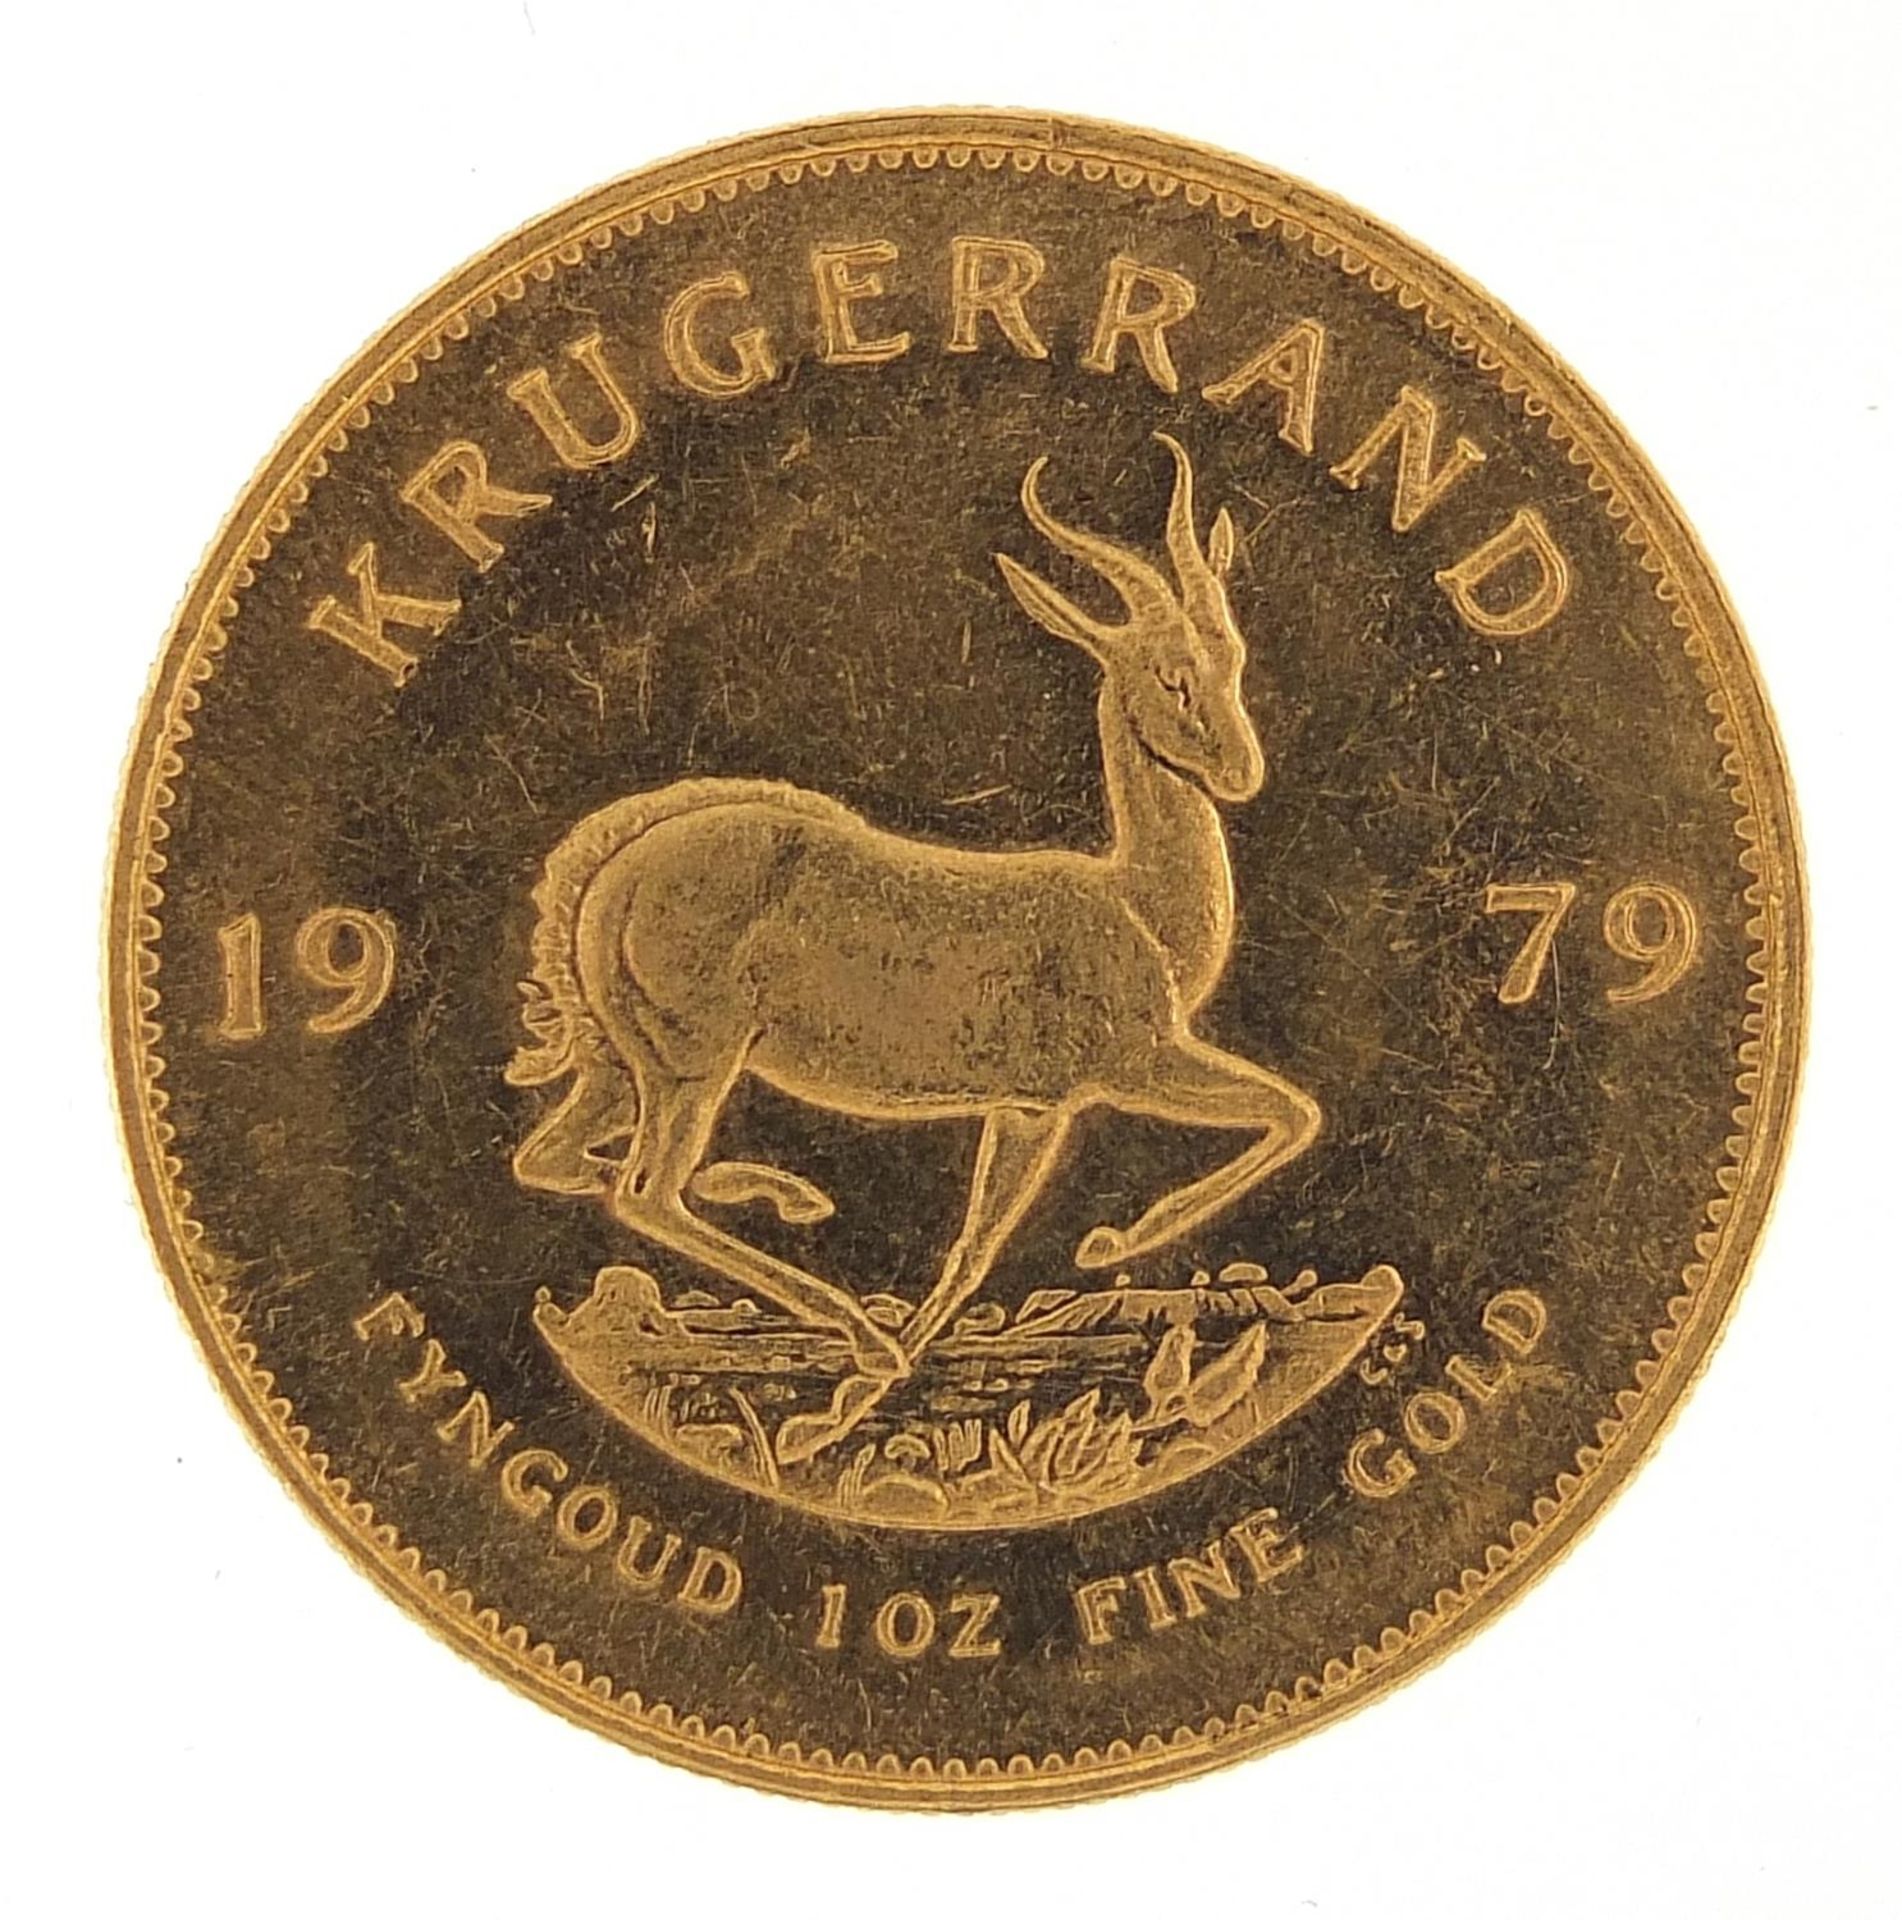 South African 1979 gold krugerrand - this lot is sold without buyer?s premium, the hammer price is